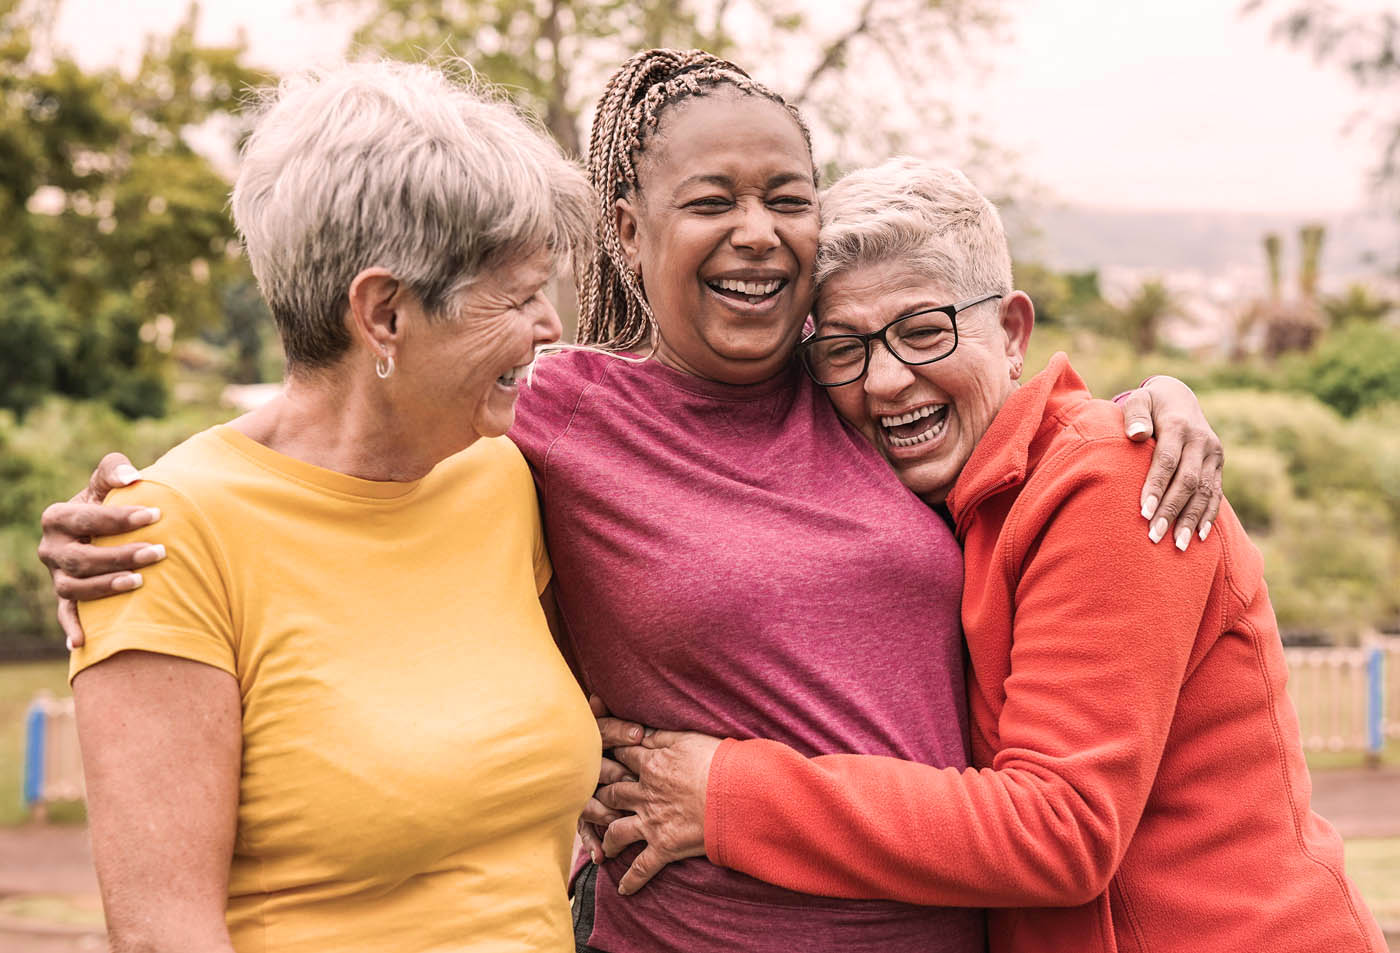 A group of elderly women laughing and hugging each other - discover Evergreen multiple sclerosis pain treatment today.